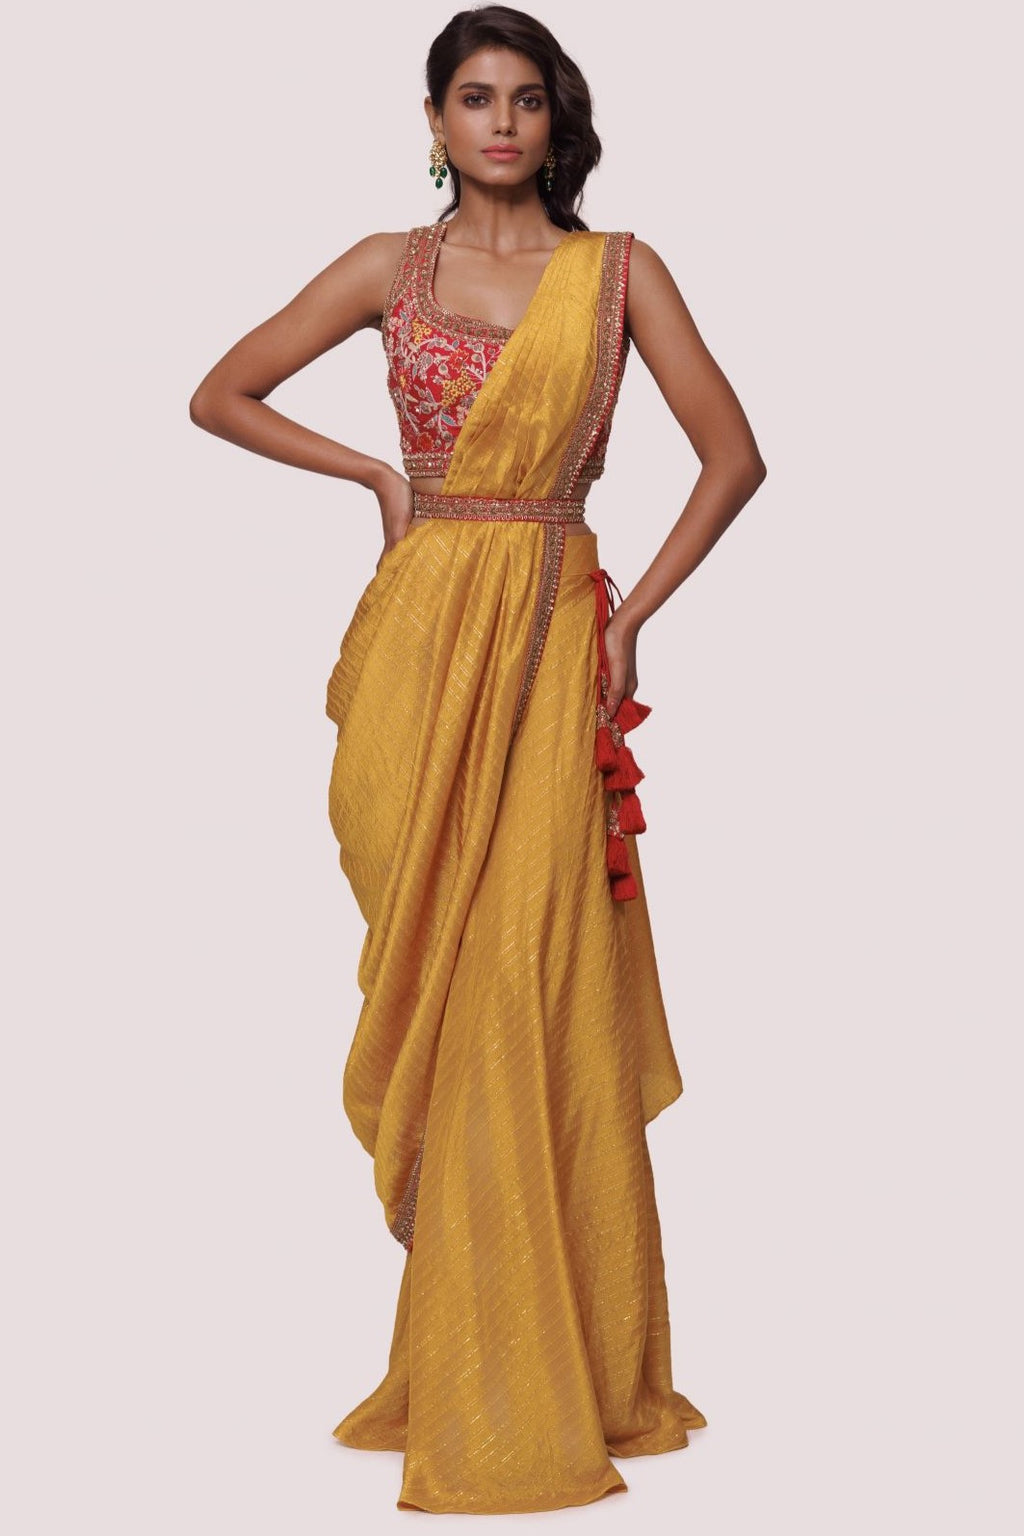 Shop mustard pre-stiched saree with thread embroidery. Make a fashion statement on festive occasions and weddings with designer sarees, designer suits, Indian dresses, Anarkali suits, palazzo suits, designer gowns, sharara suits, and embroidered sarees from Pure Elegance Indian fashion store in the USA.